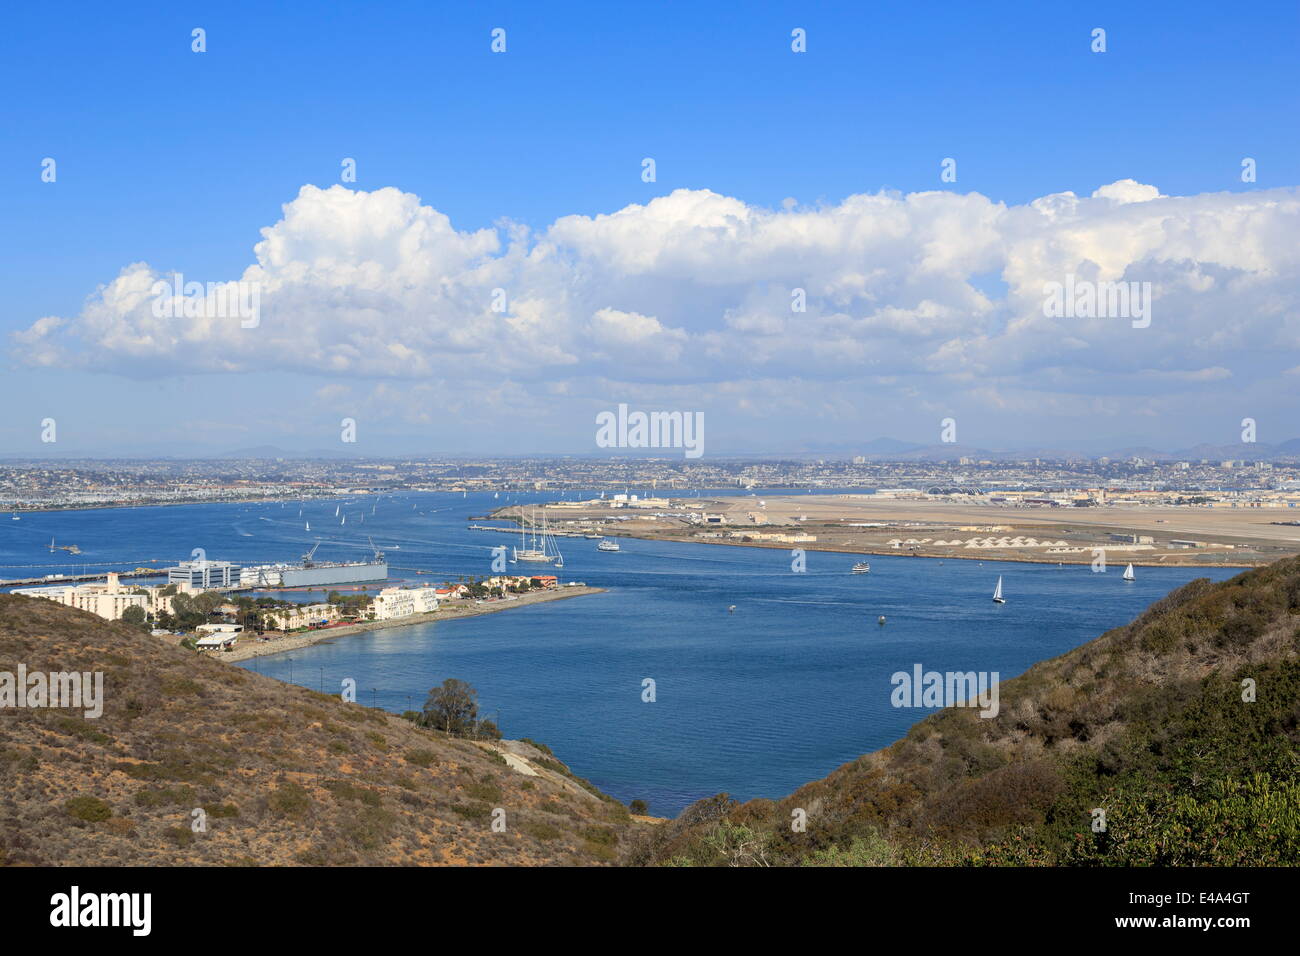 San Diego Bay viewed from Cabrillo National Monument, Point Loma, San Diego, California, United States of America, North America Stock Photo